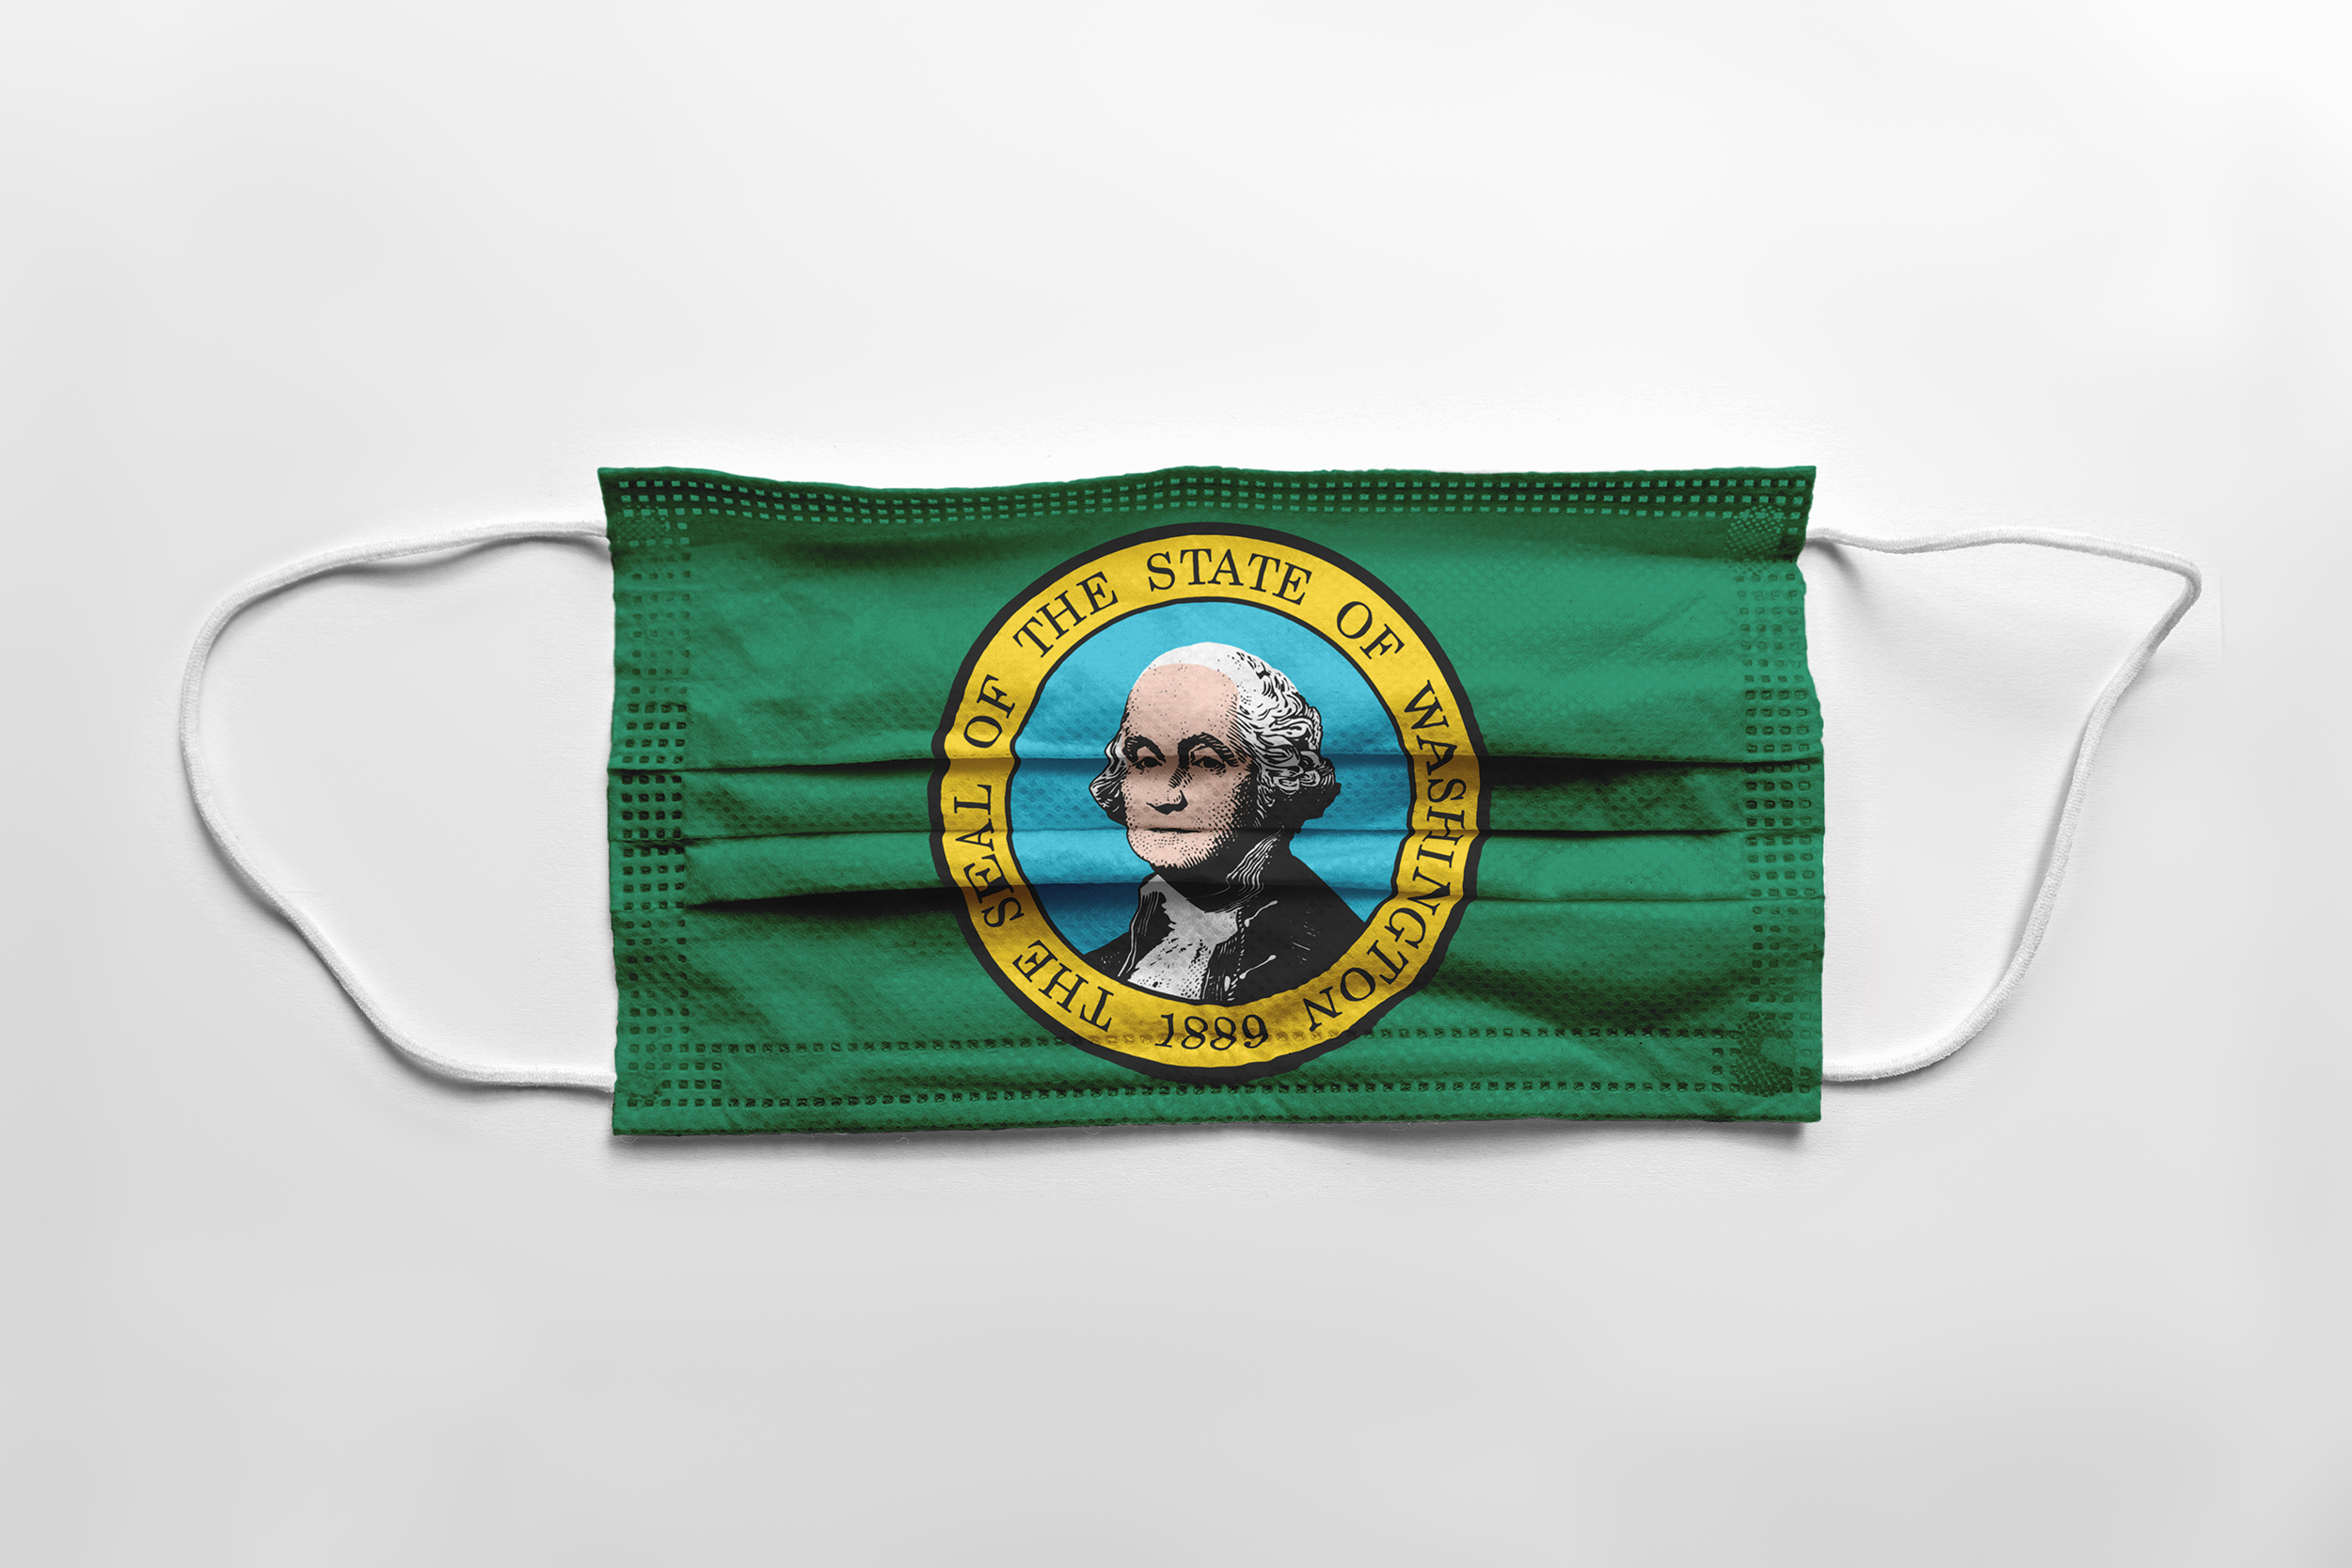 A face mask with the Washington on white background